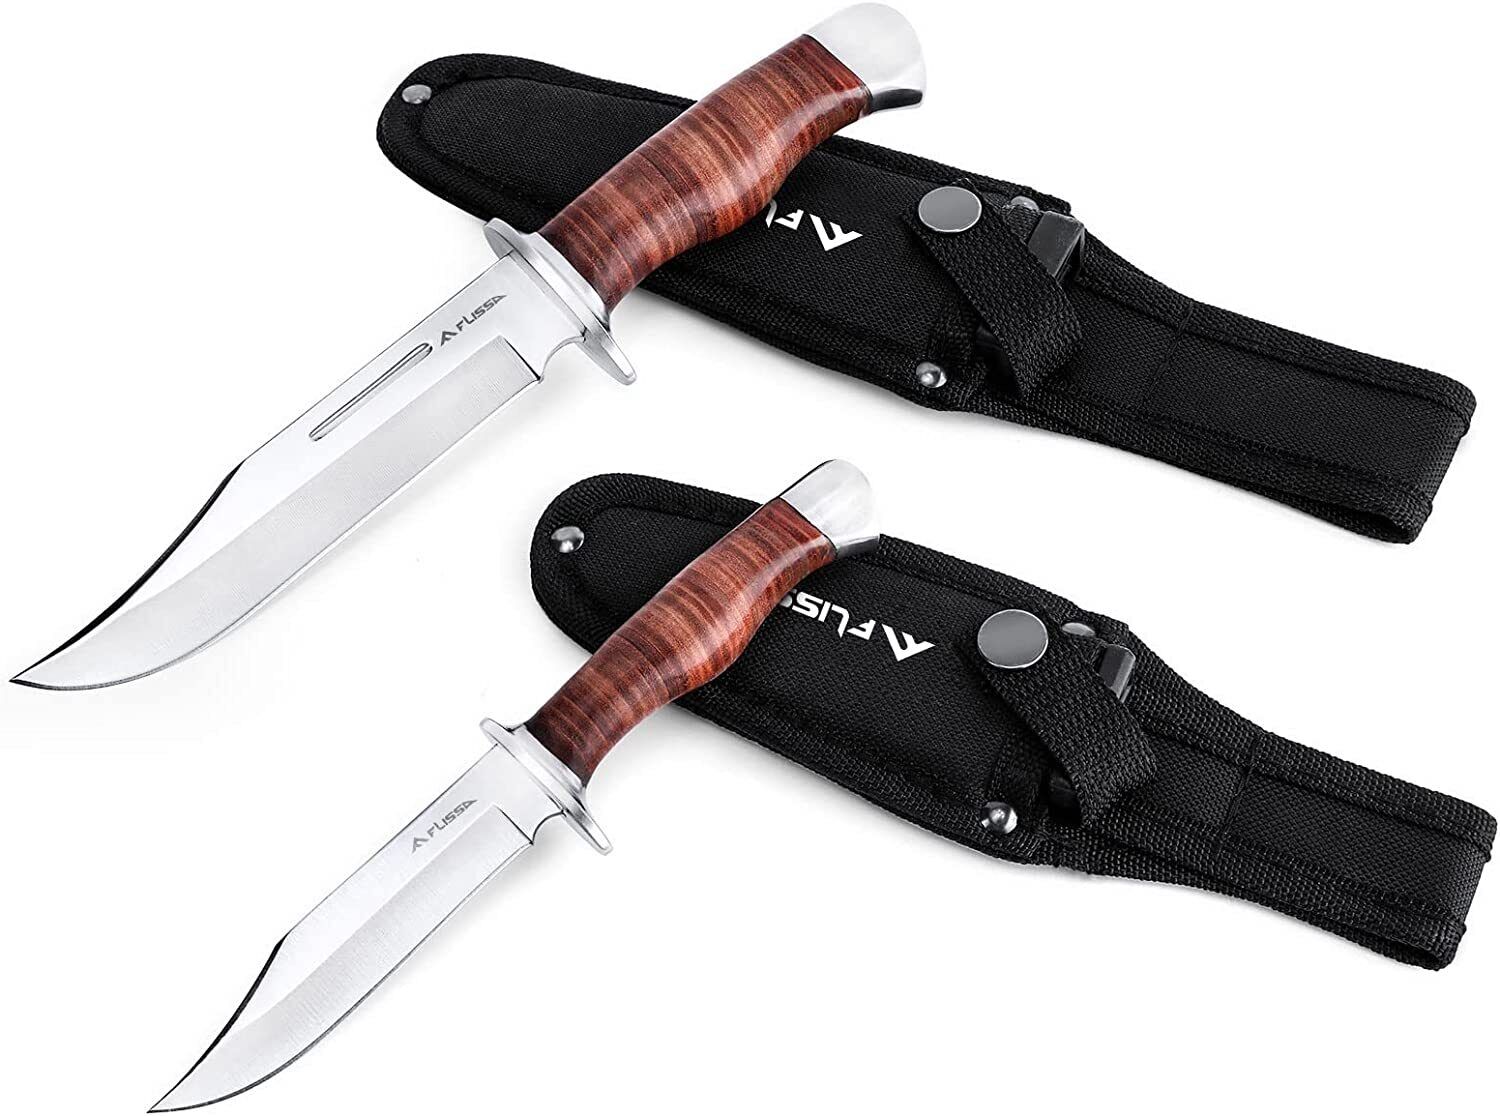 FLISSA 2-piece Bowie Knife with Sheath, Fixed Blade Hunting Knife with Handle